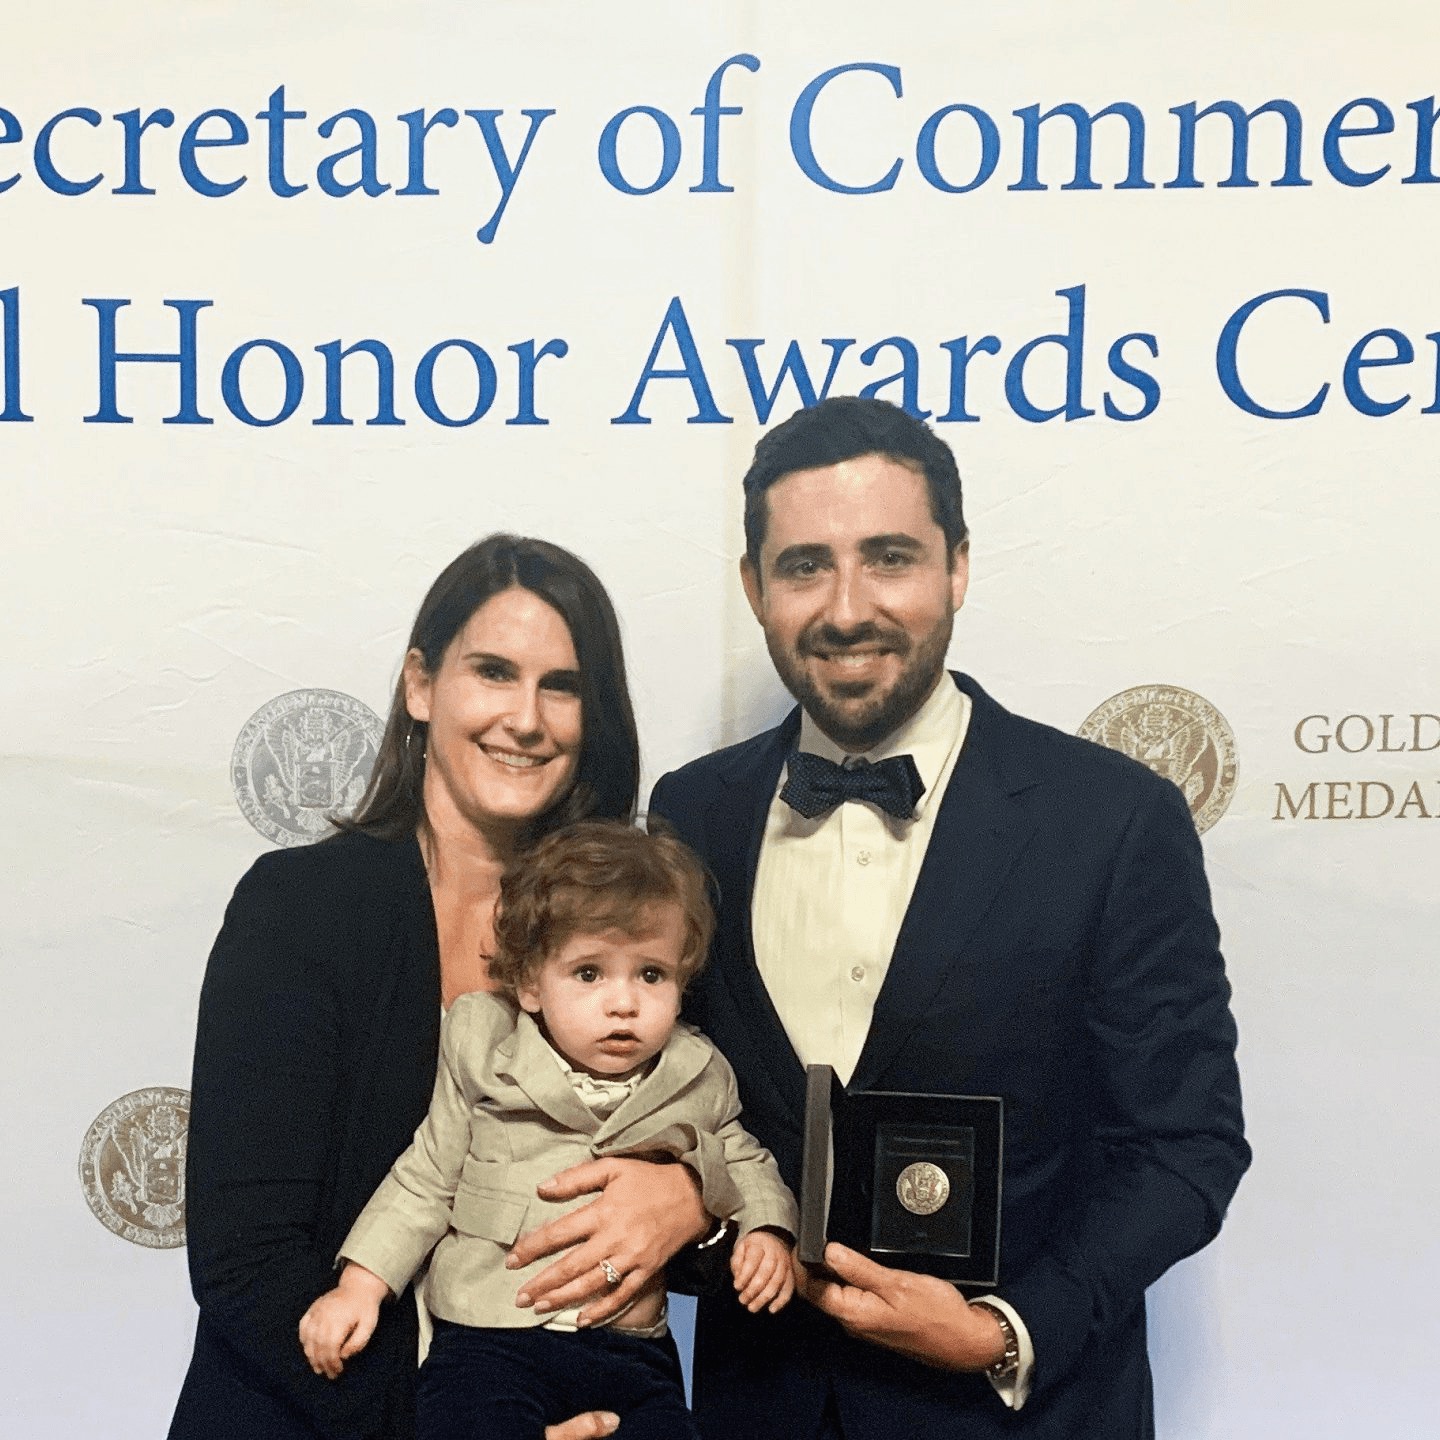 Celebrating with my family after receiving the Department of Commerce Silver Medal.